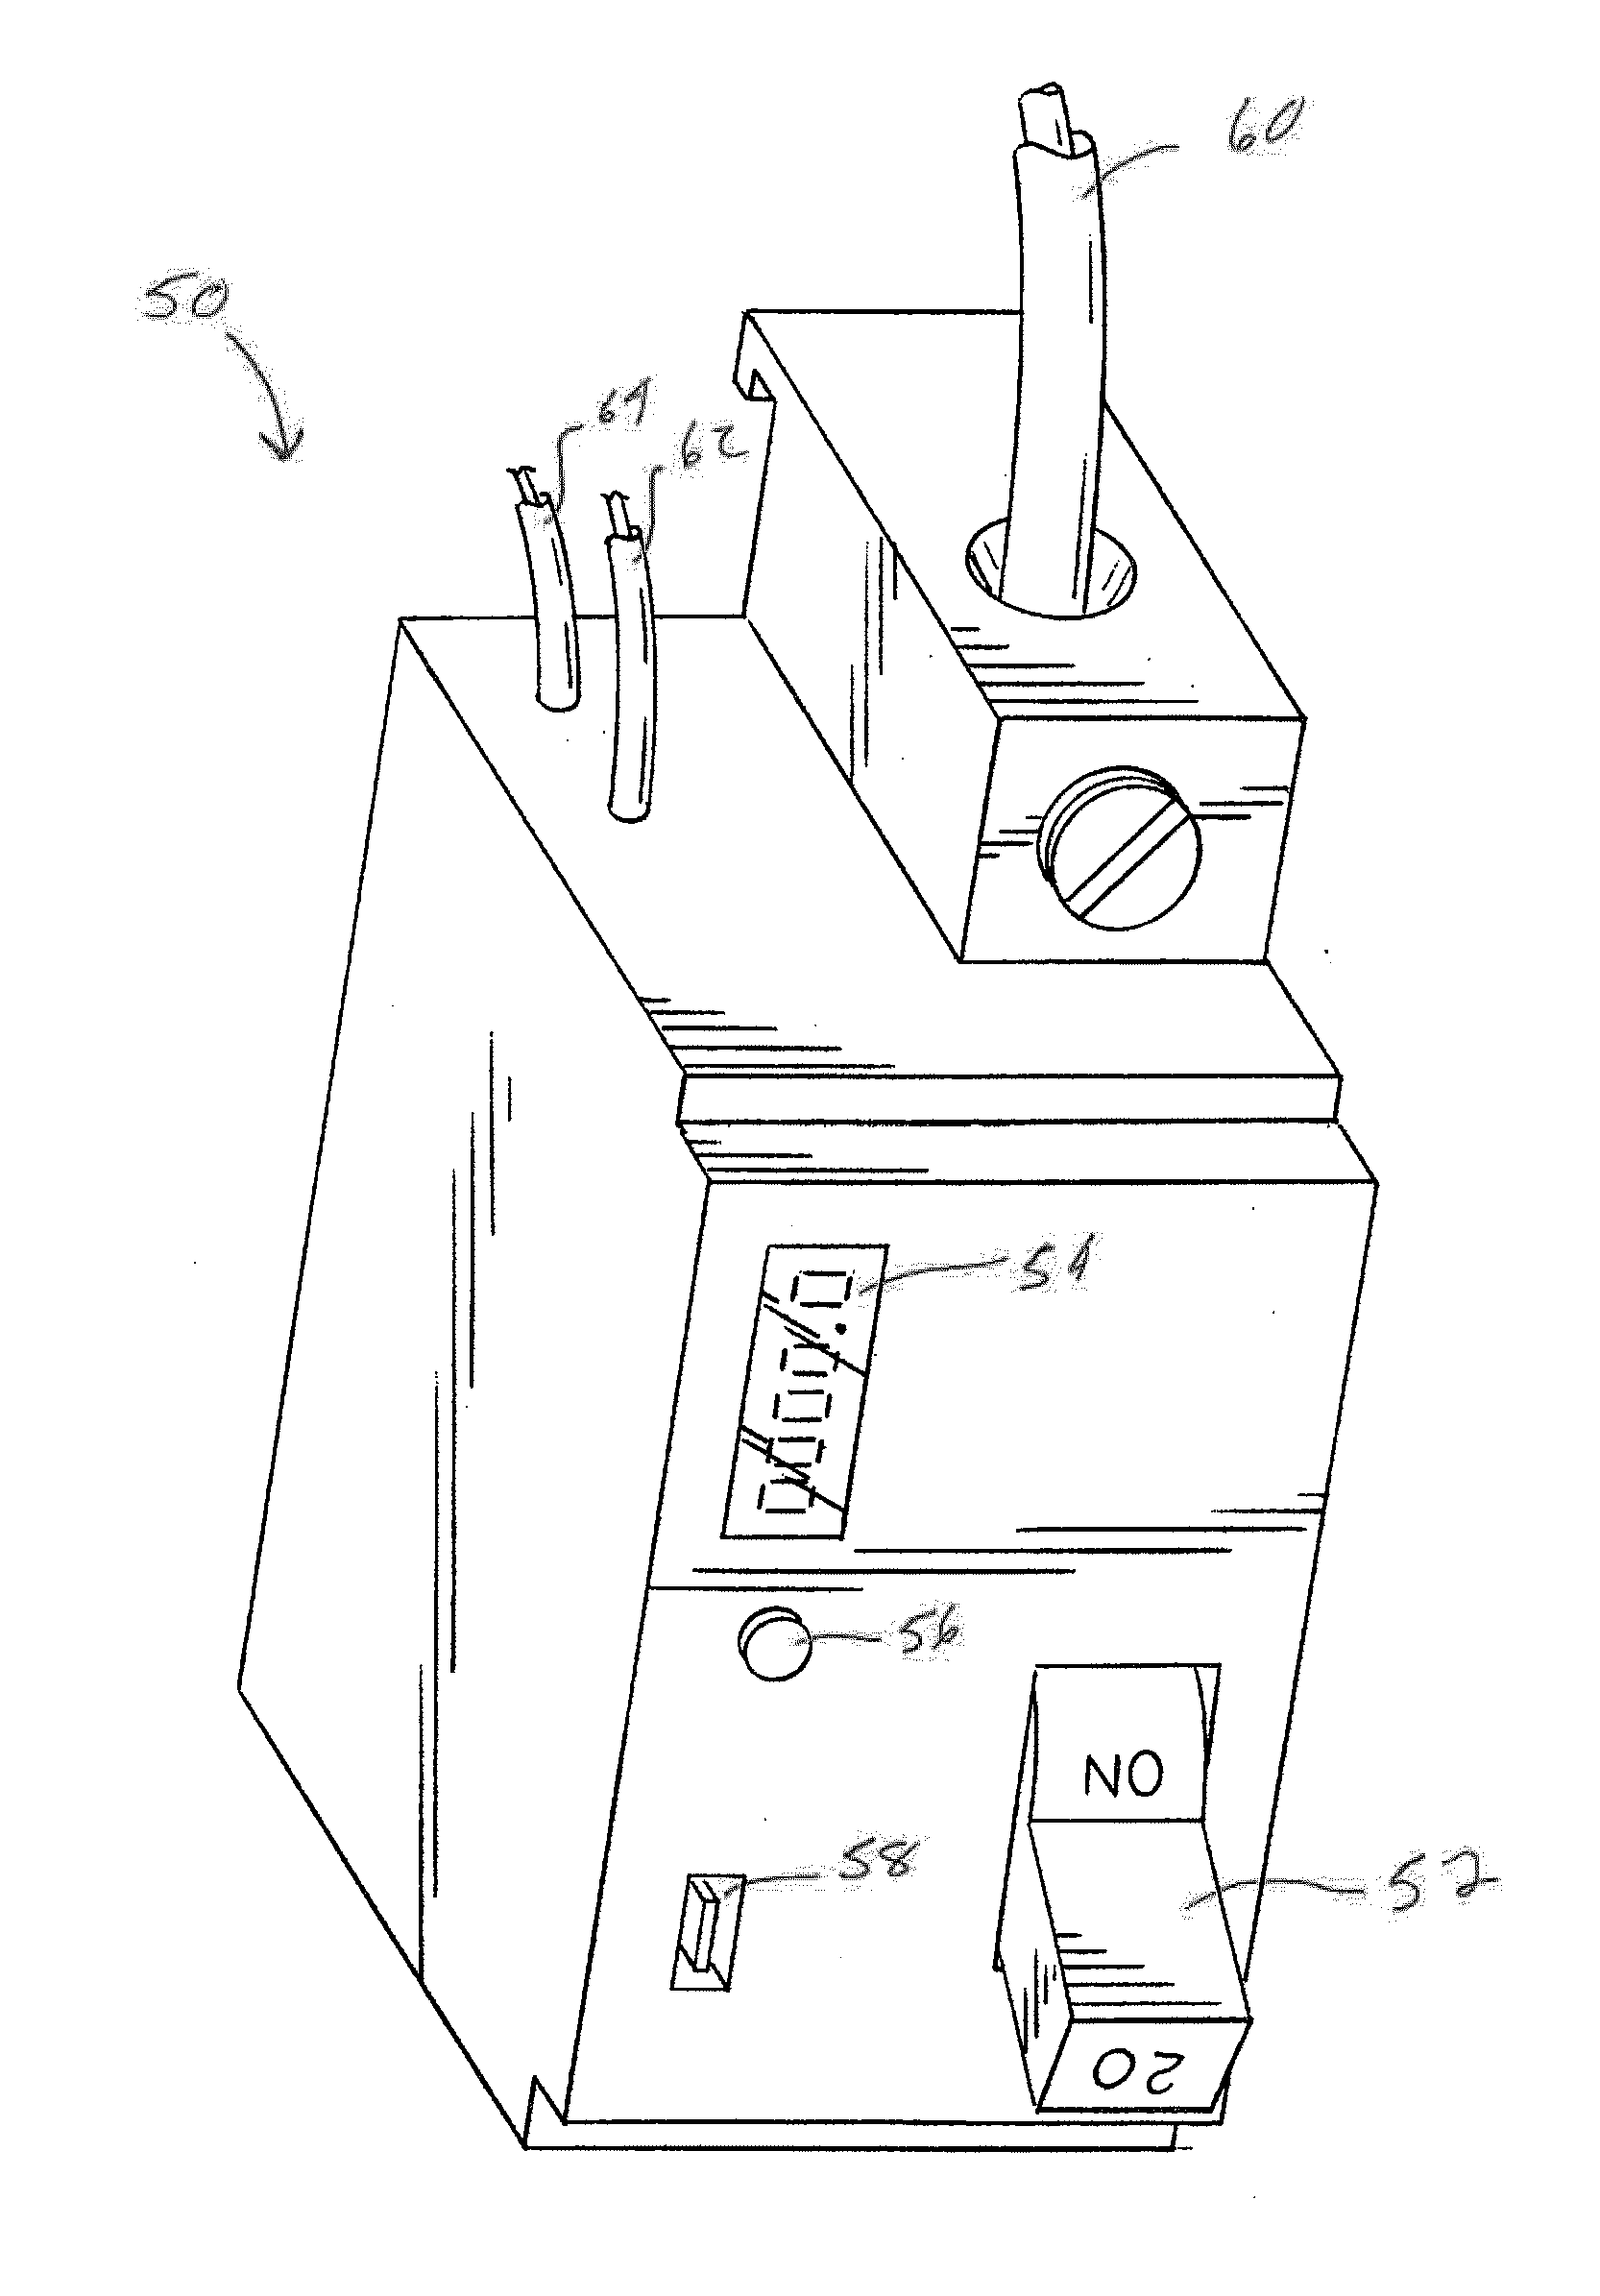 Resource monitoring device